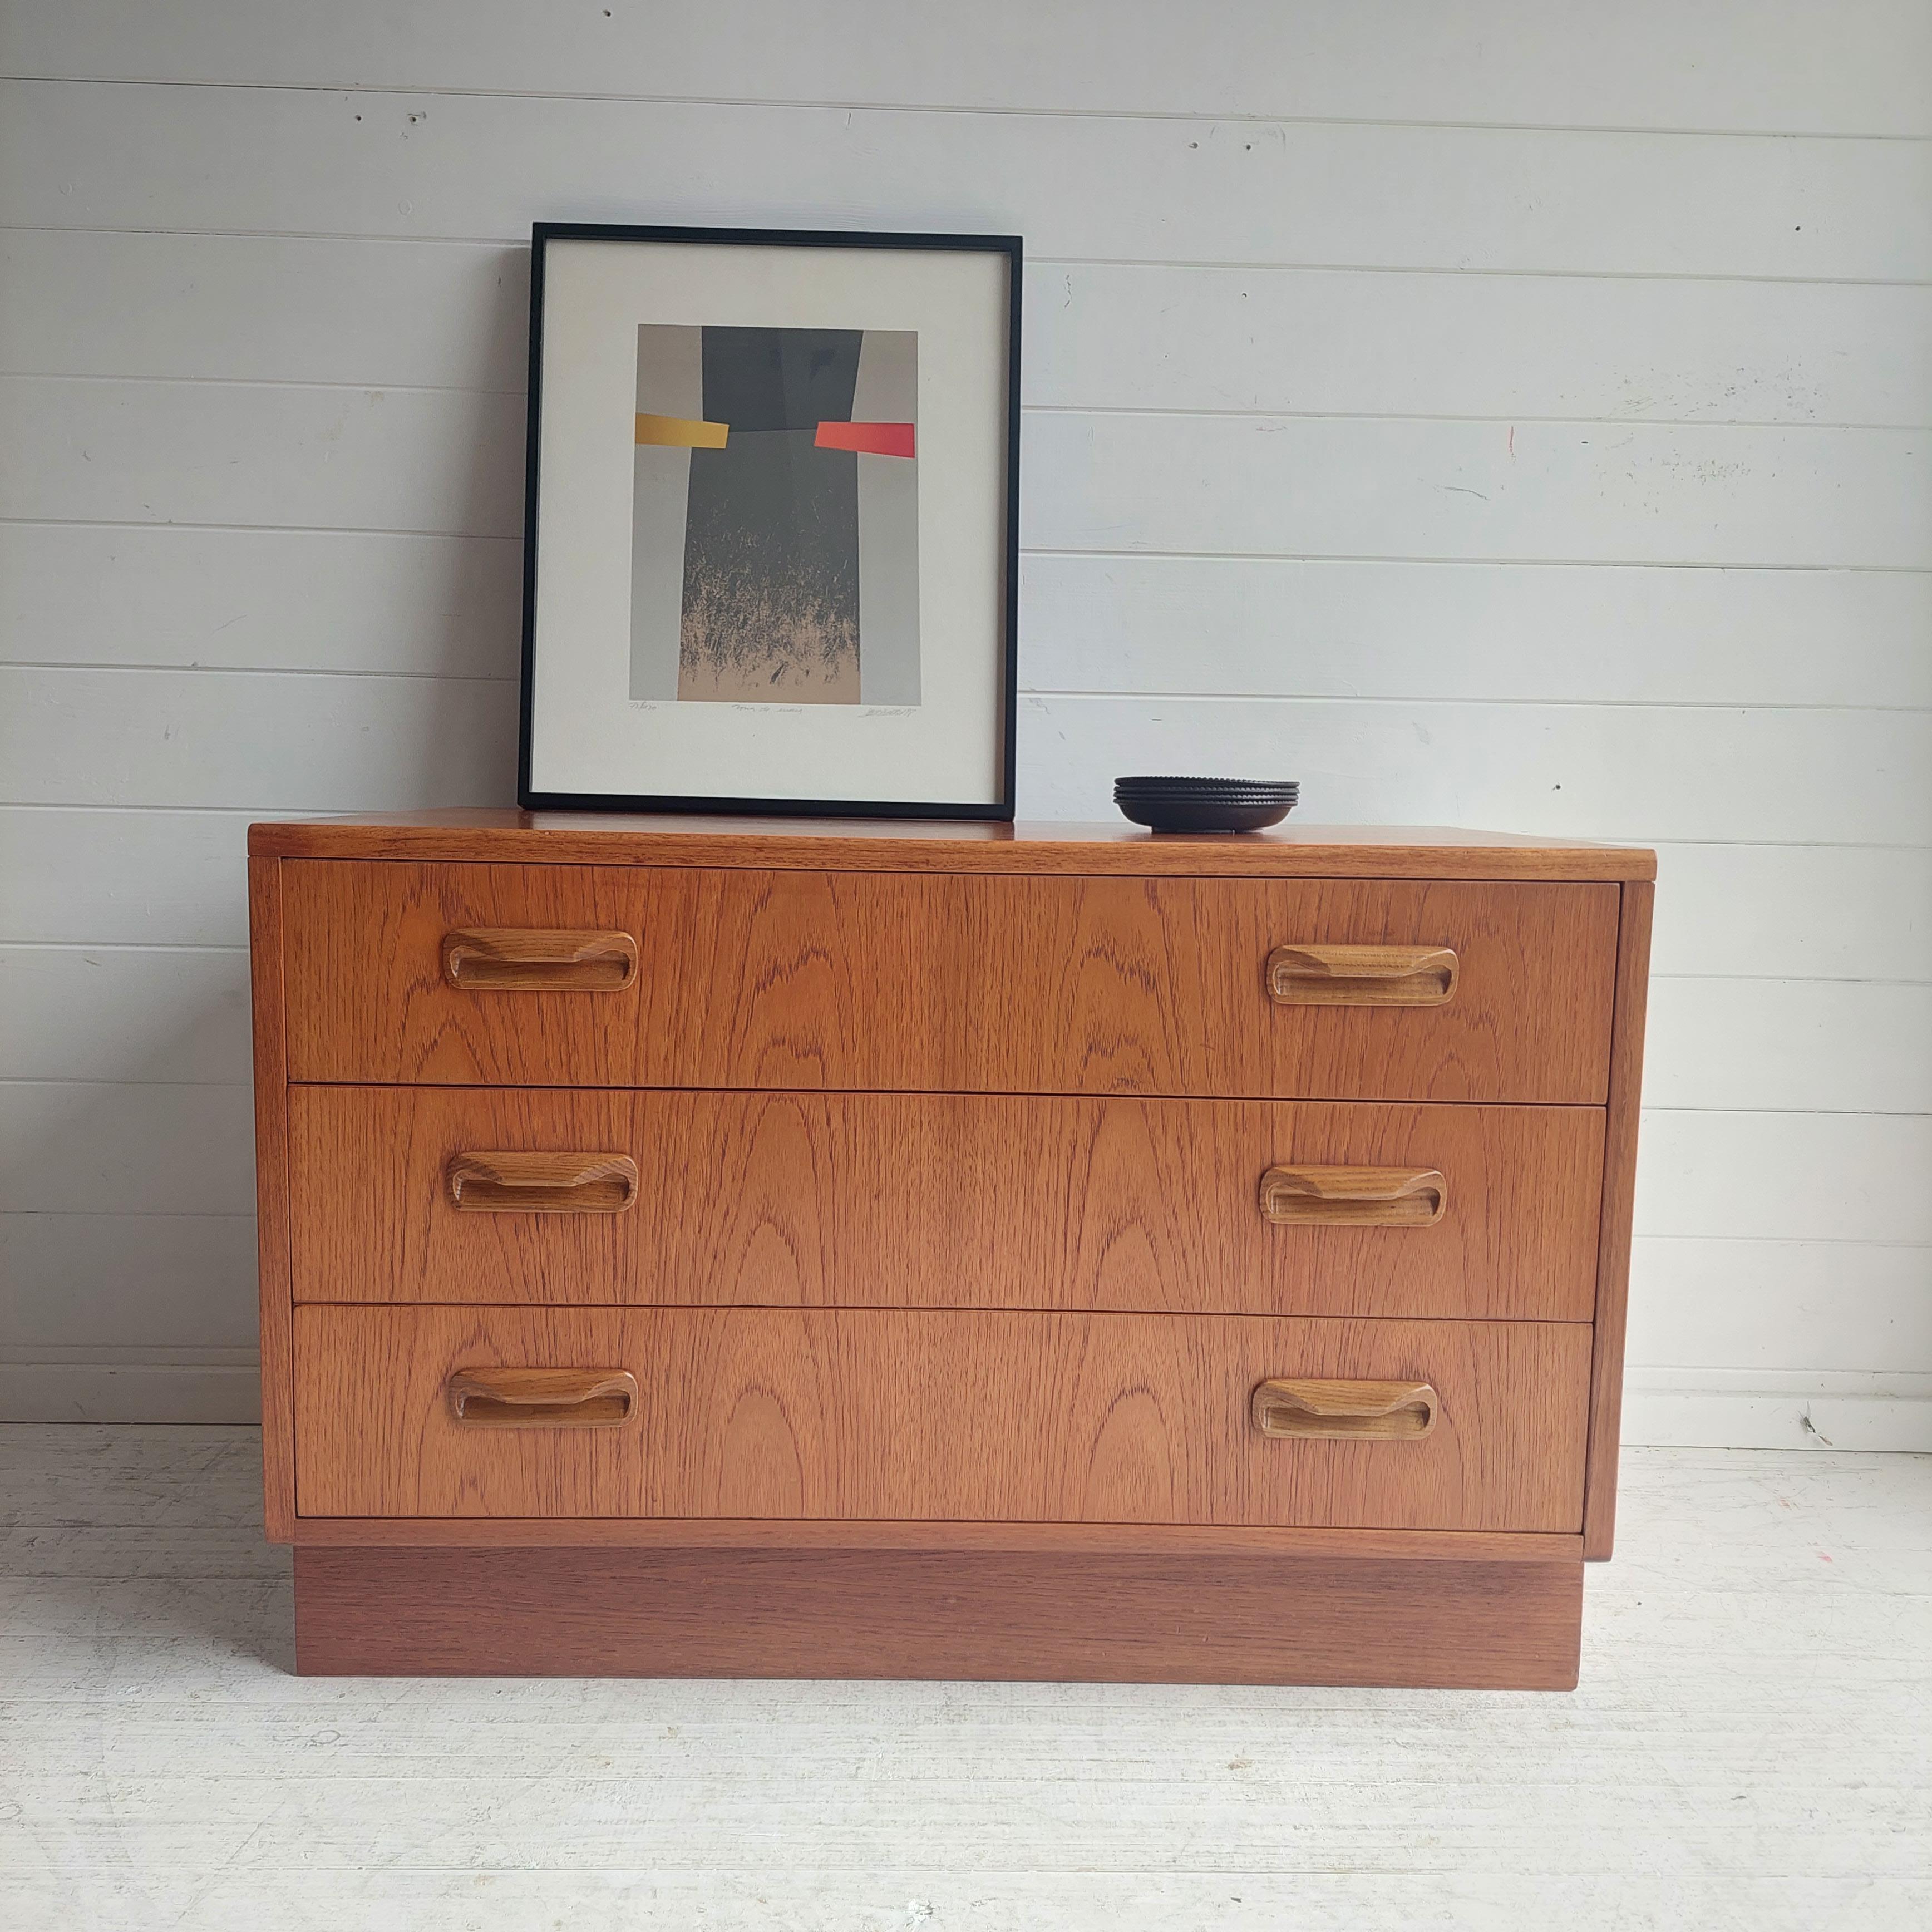 G-Plan Red Label small chest of drawers.
Circa 1960/70s
G Plan Furniture has been noted for many years for its sound construction and excellent design. 
The chest has a beautiful teak ’matchbook’ grain, warm tones and rich colours throughout. 
Both